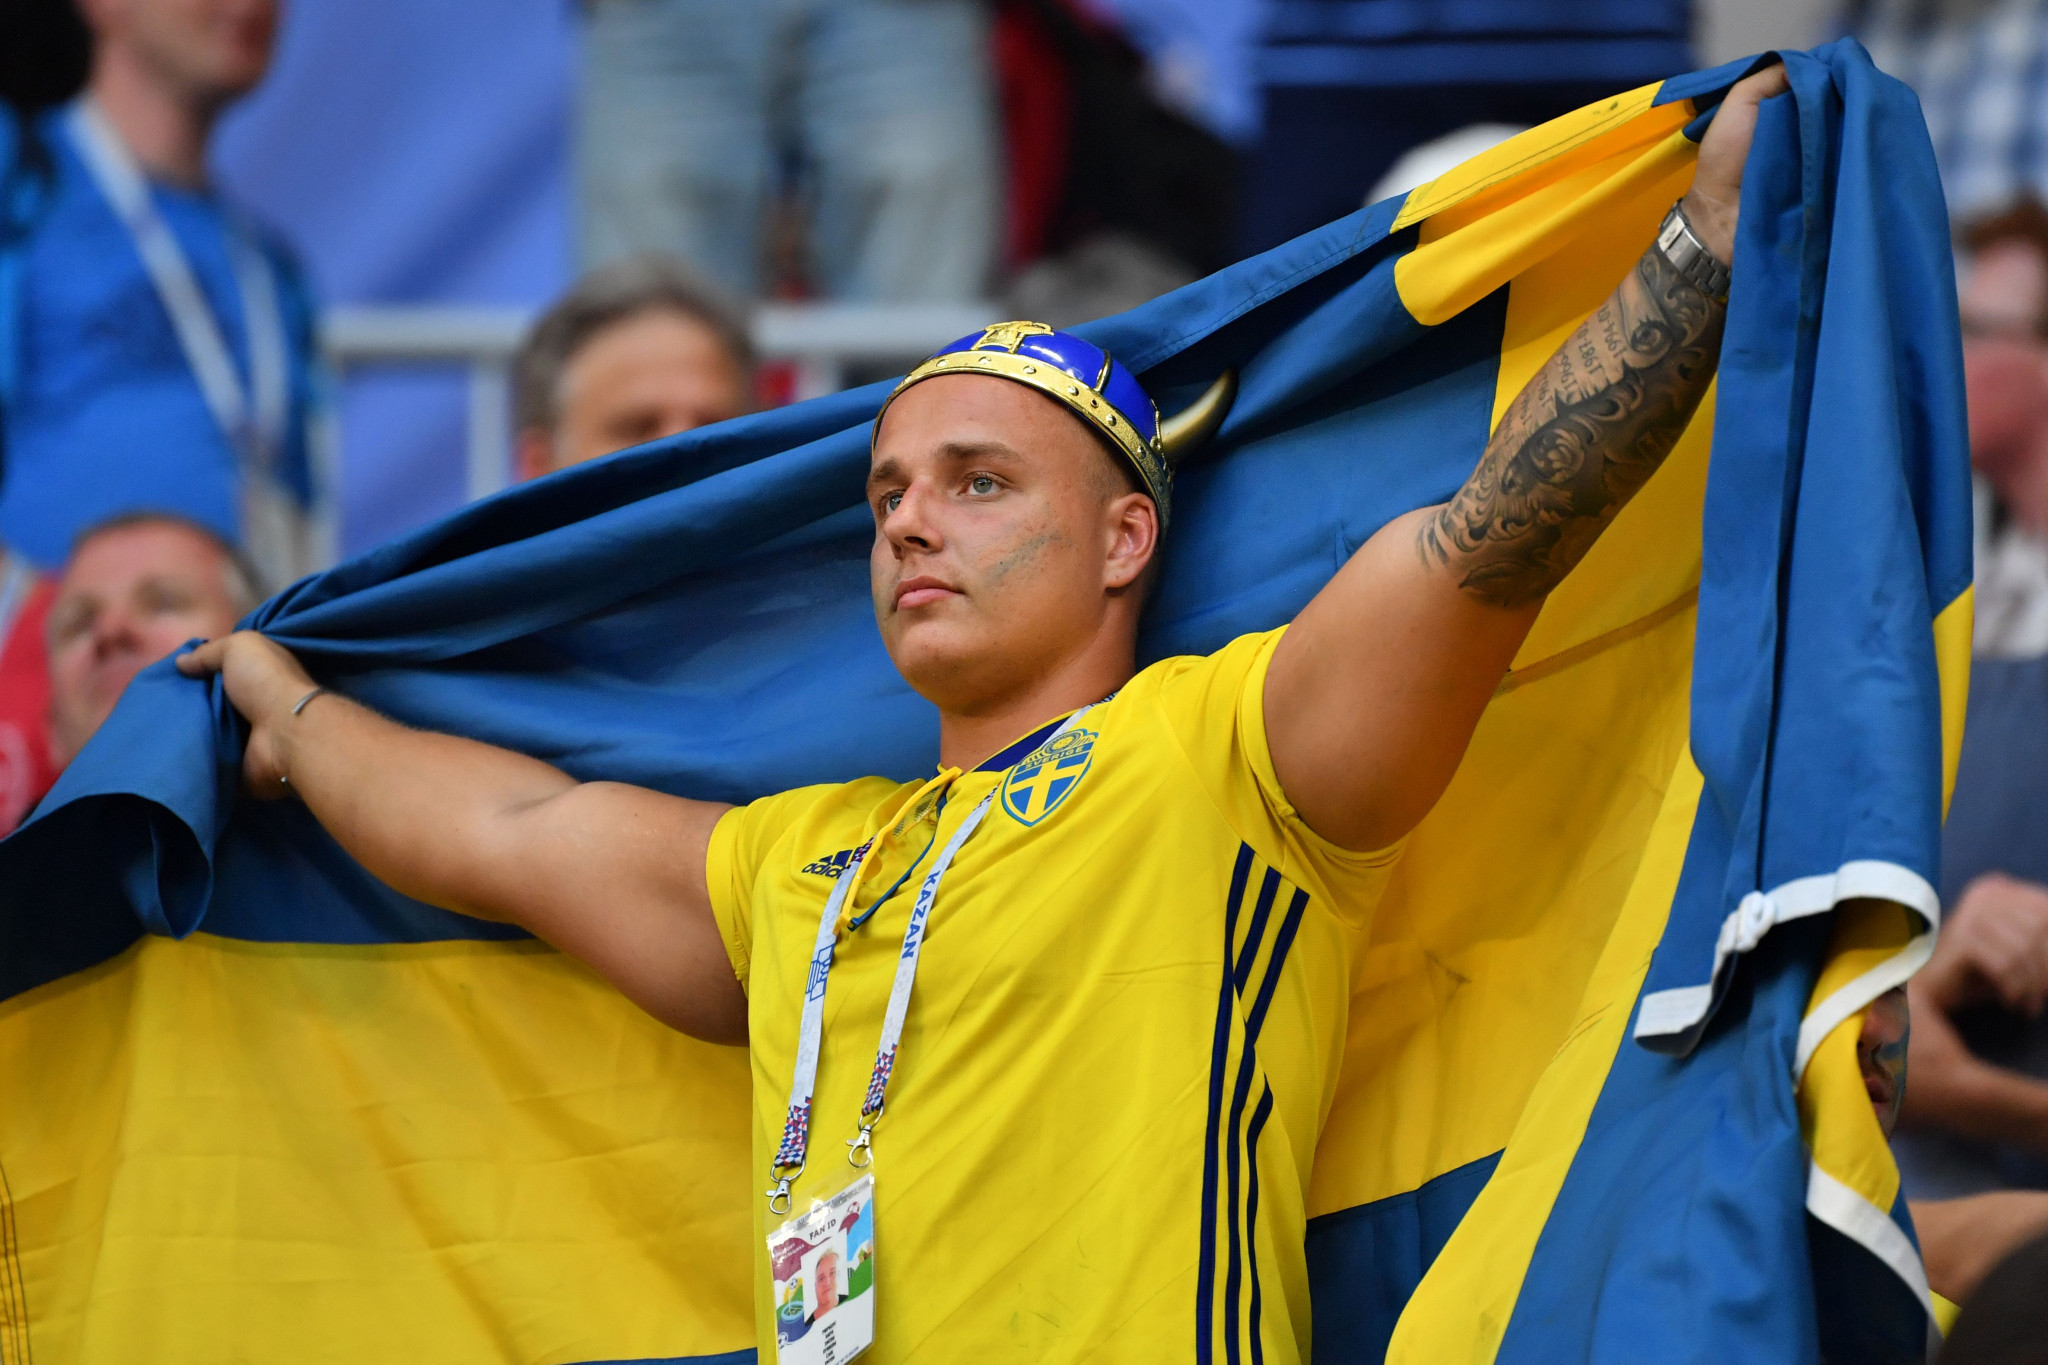 A disappointed Sweden fan following the team's defeat ©Getty Images